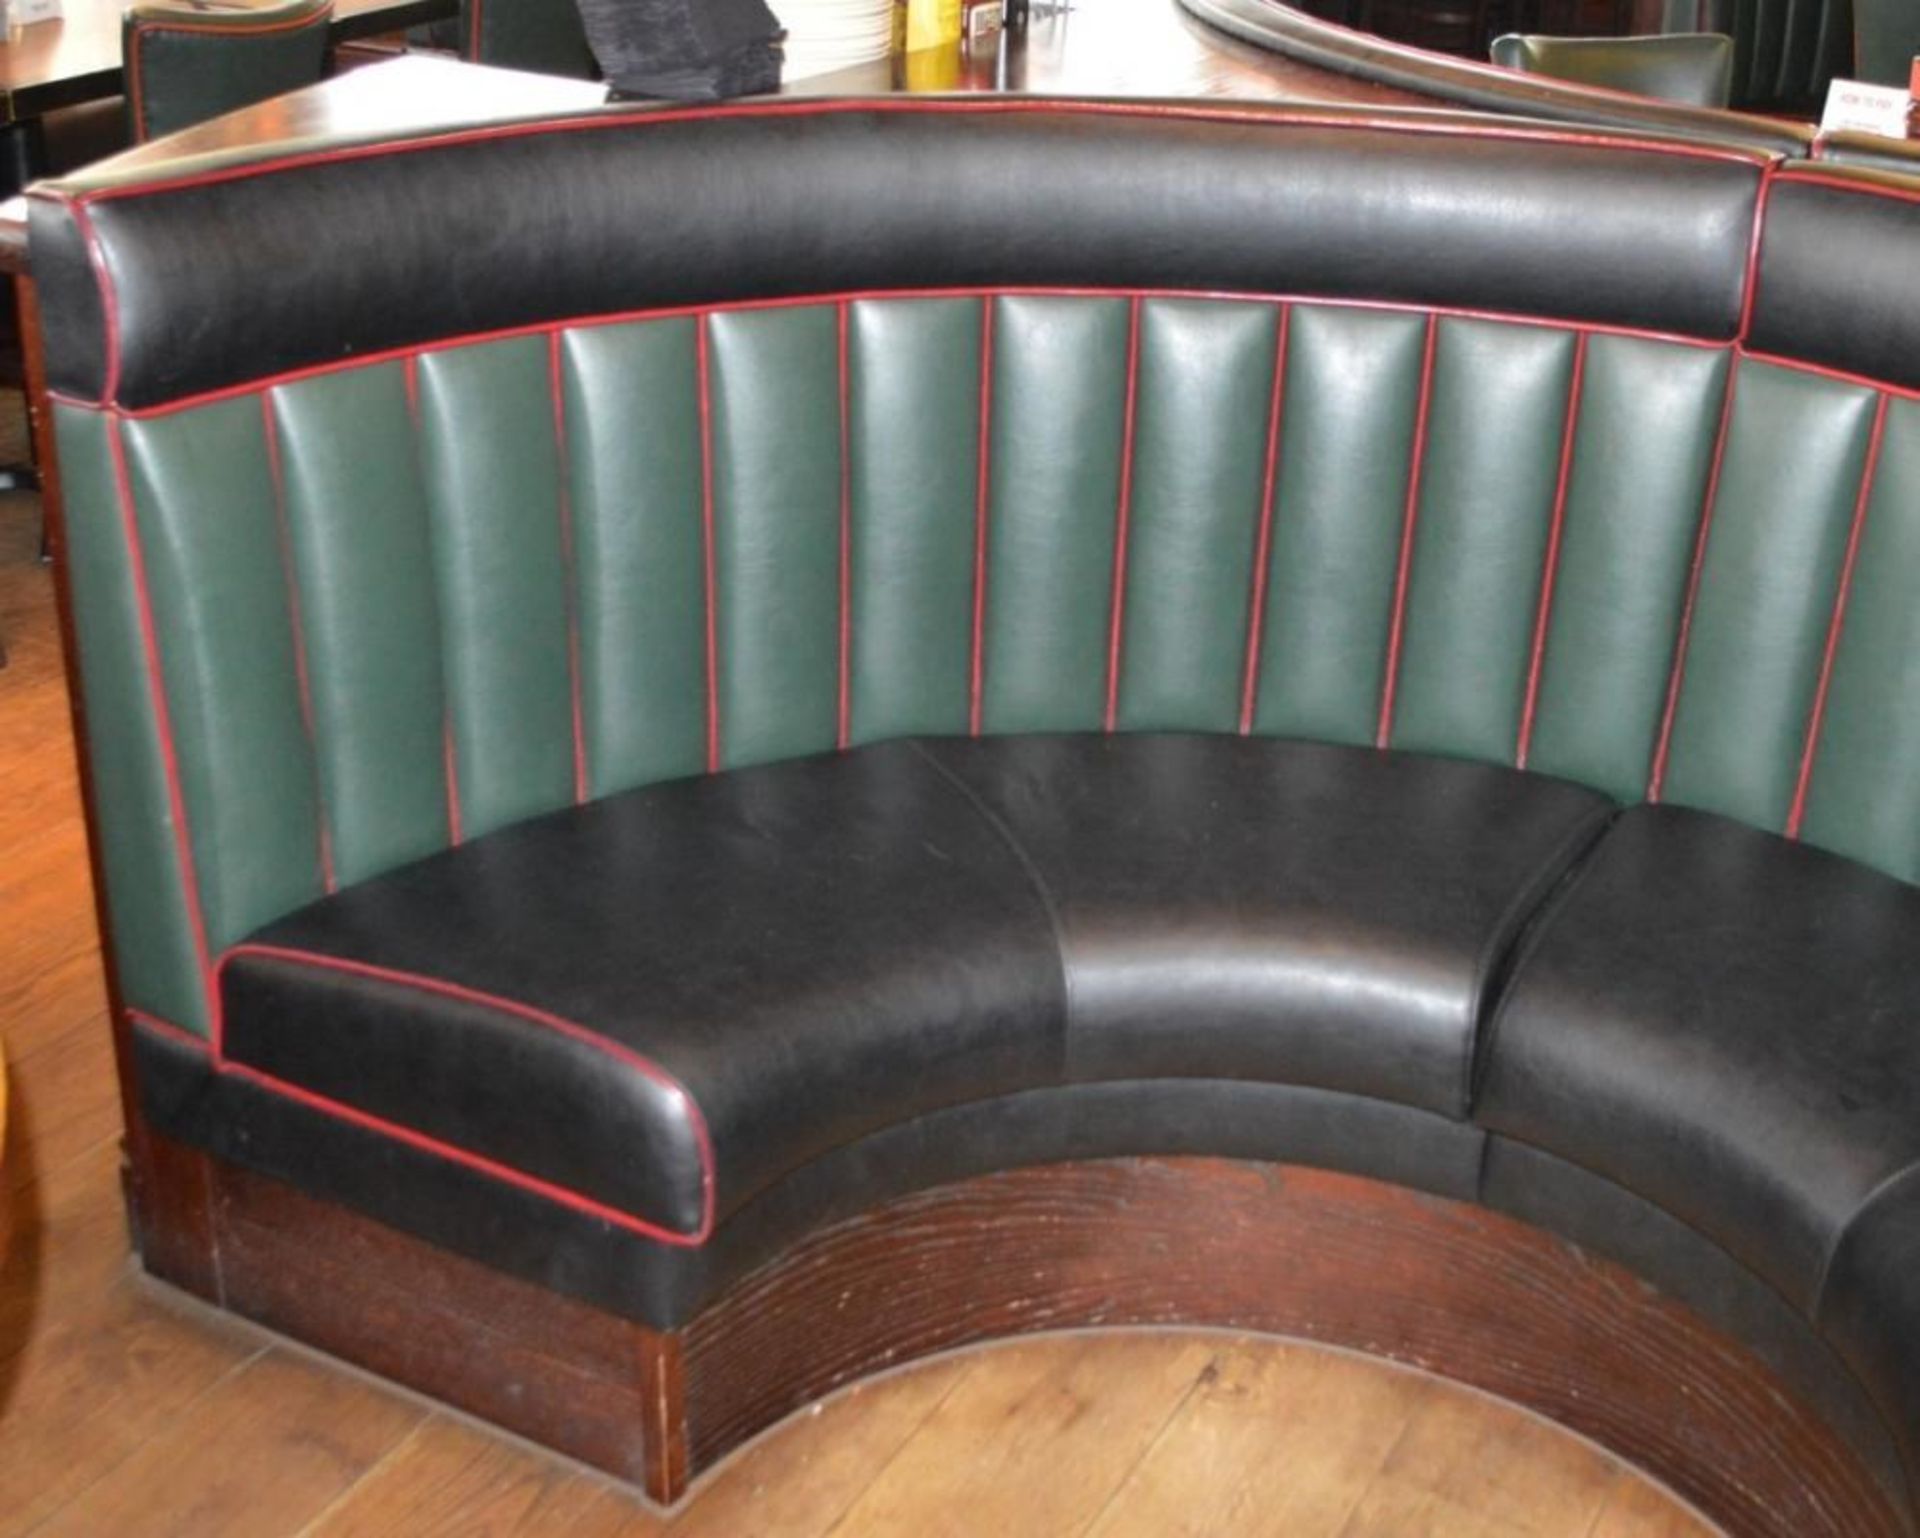 1 x Contemporary Half Circle Seating Booth - Features a Leather Upholstery in Green and Black, - Image 5 of 5